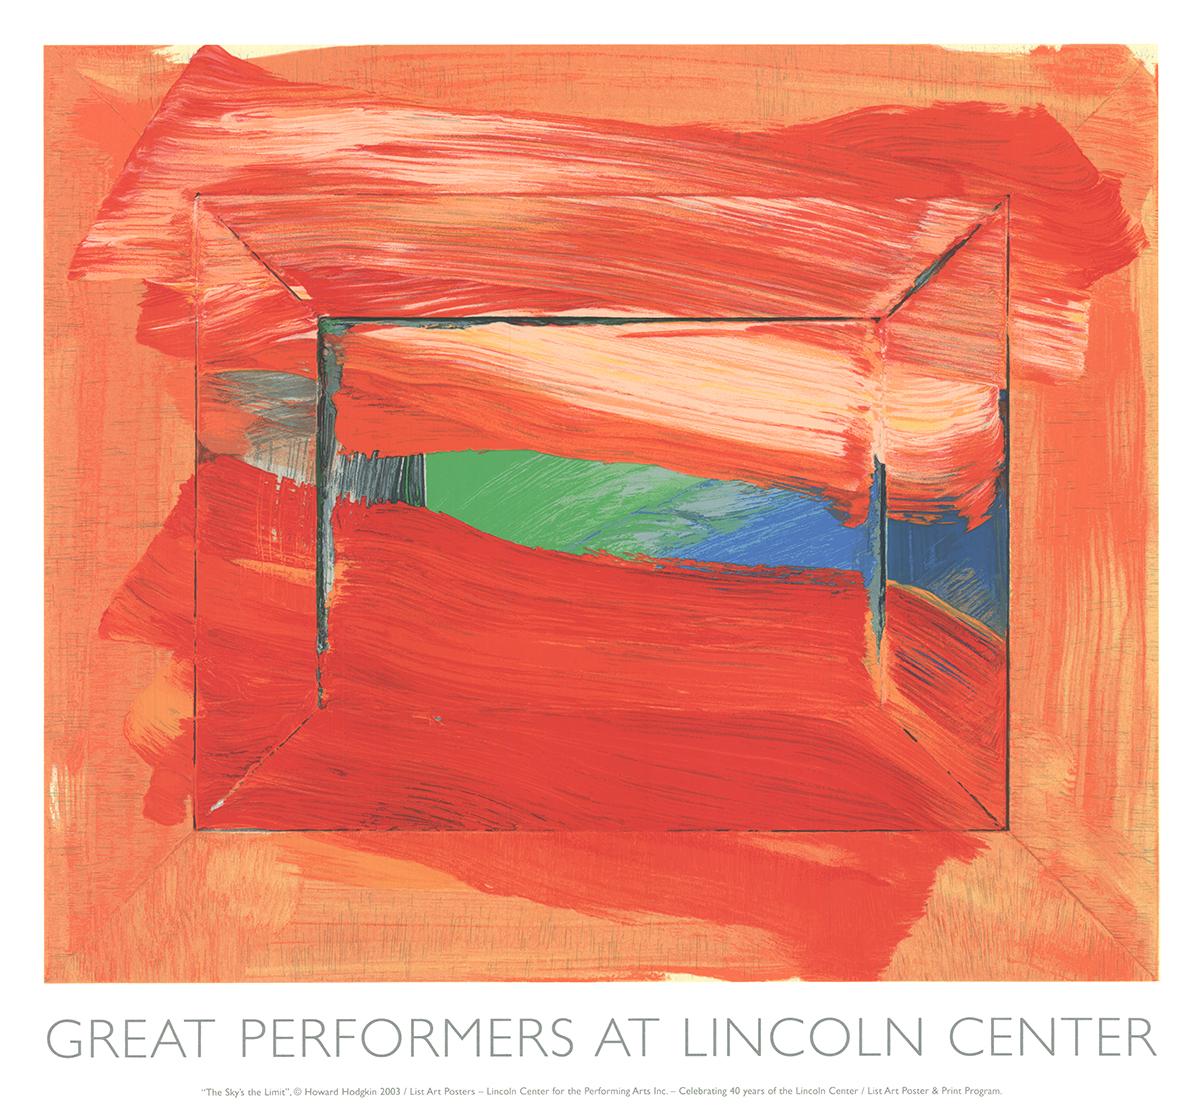 Limited edition serigraph poster by Howard Hodgkin published by the Lincoln Center for the Performing Arts in 2002.